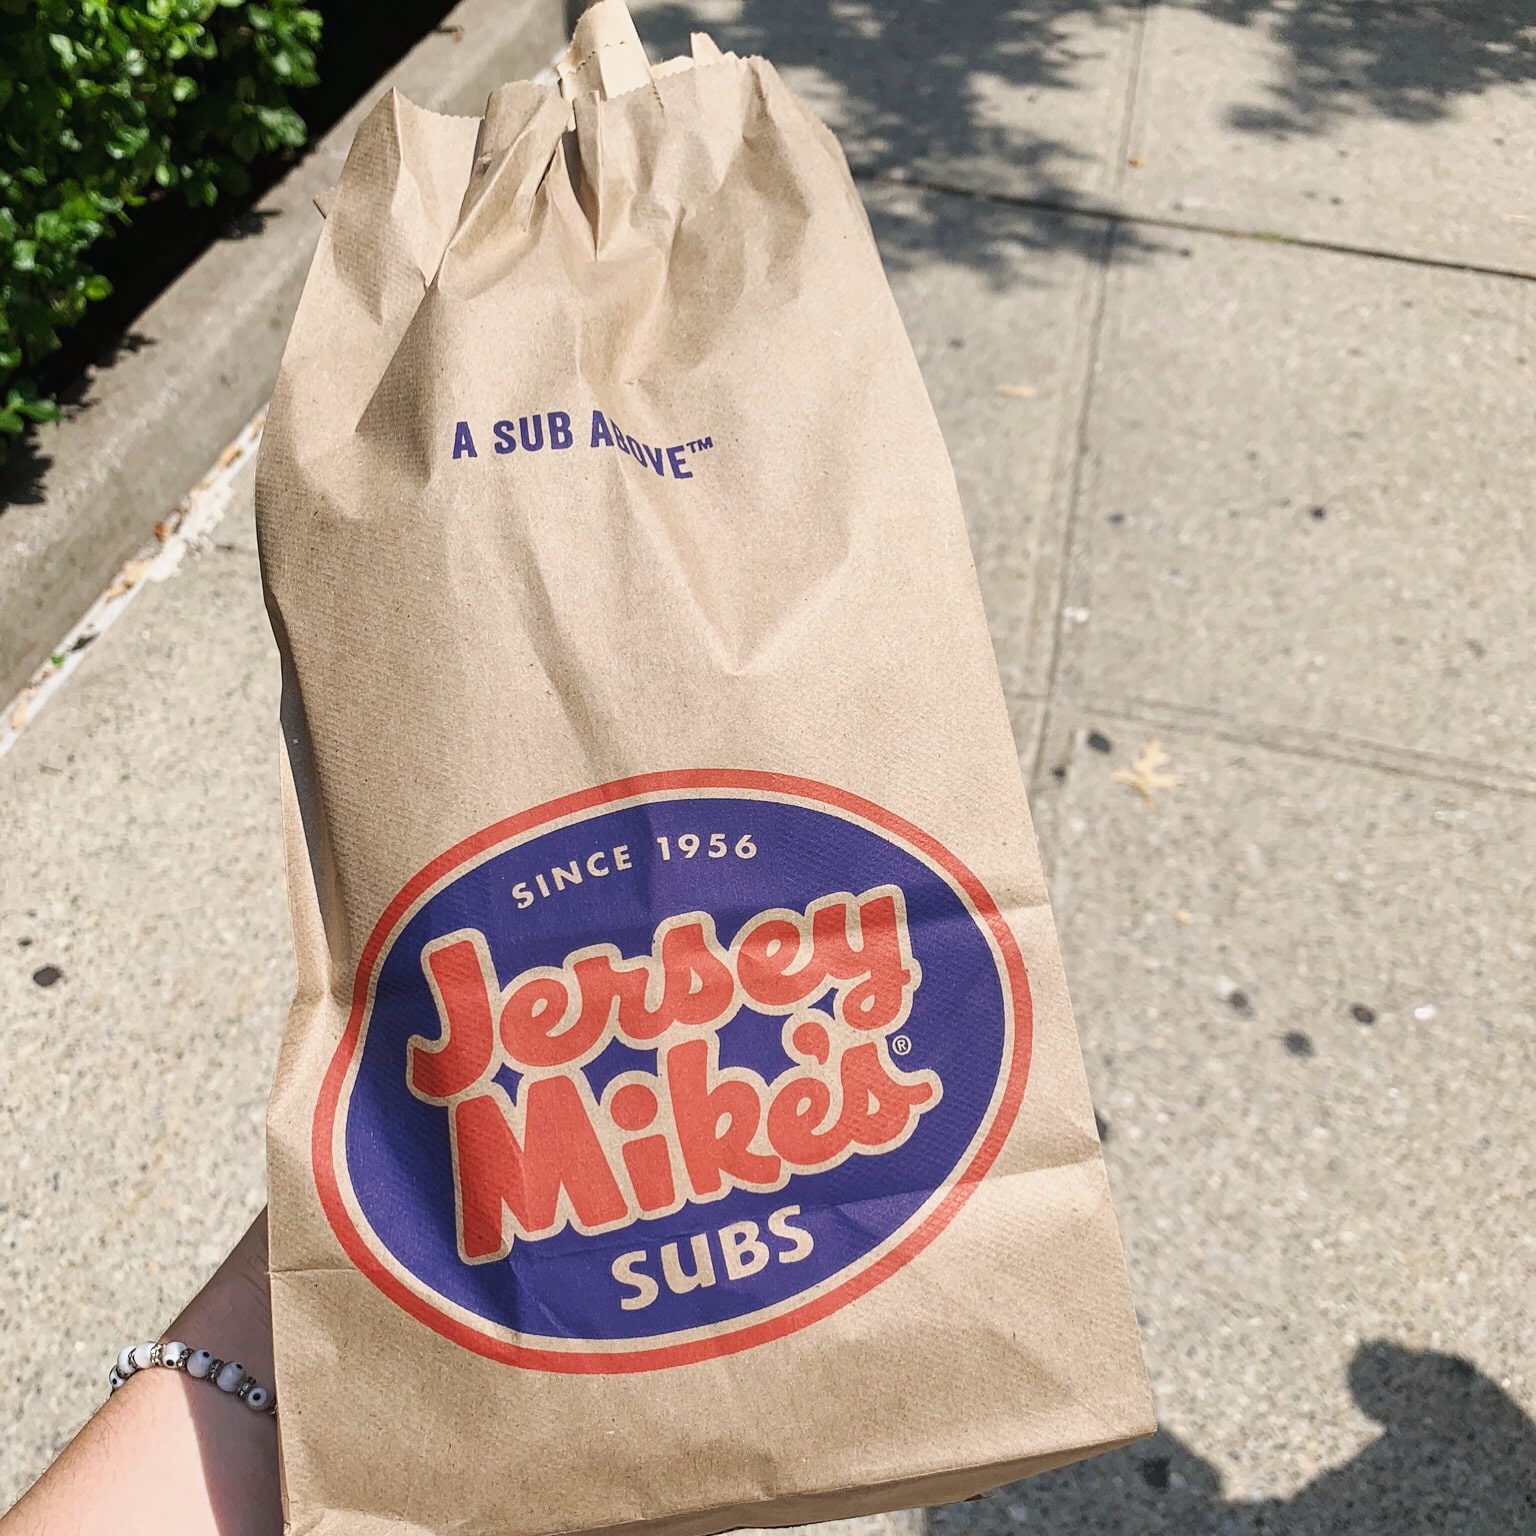 jersey mikes subs